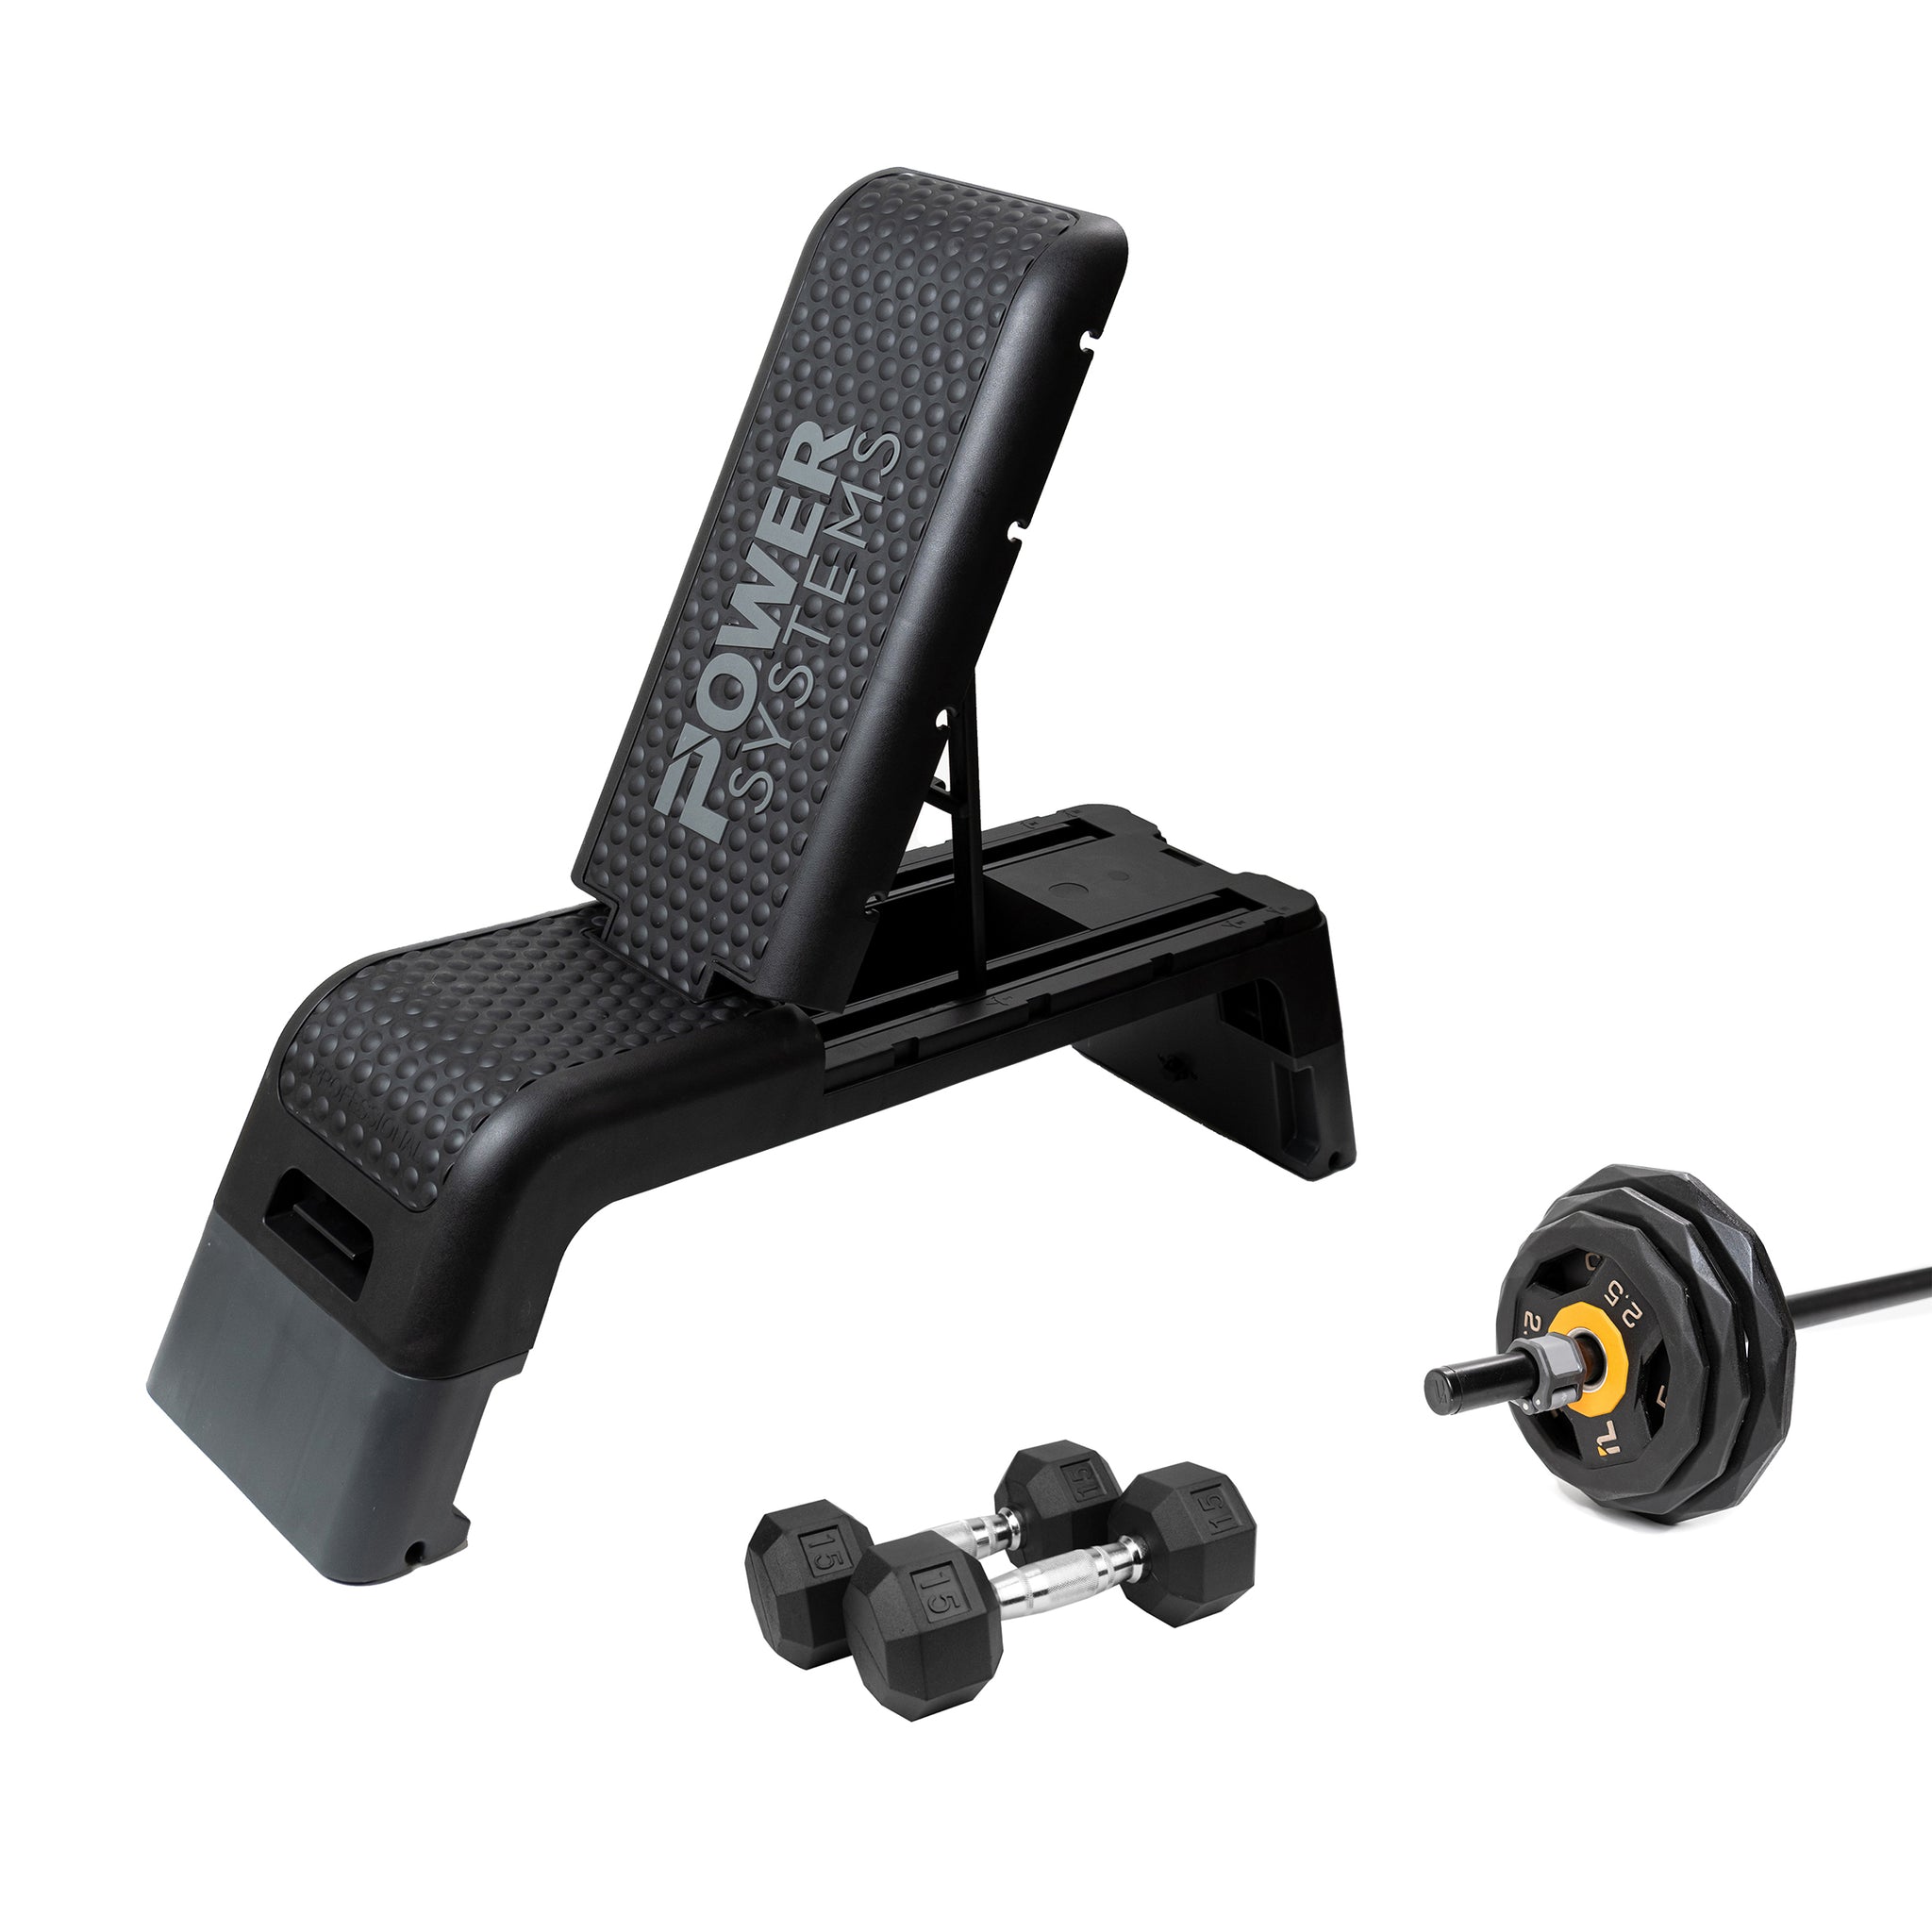 Workout bench, a set of dumbbells, and a pump bar with plates and a lock jaw.